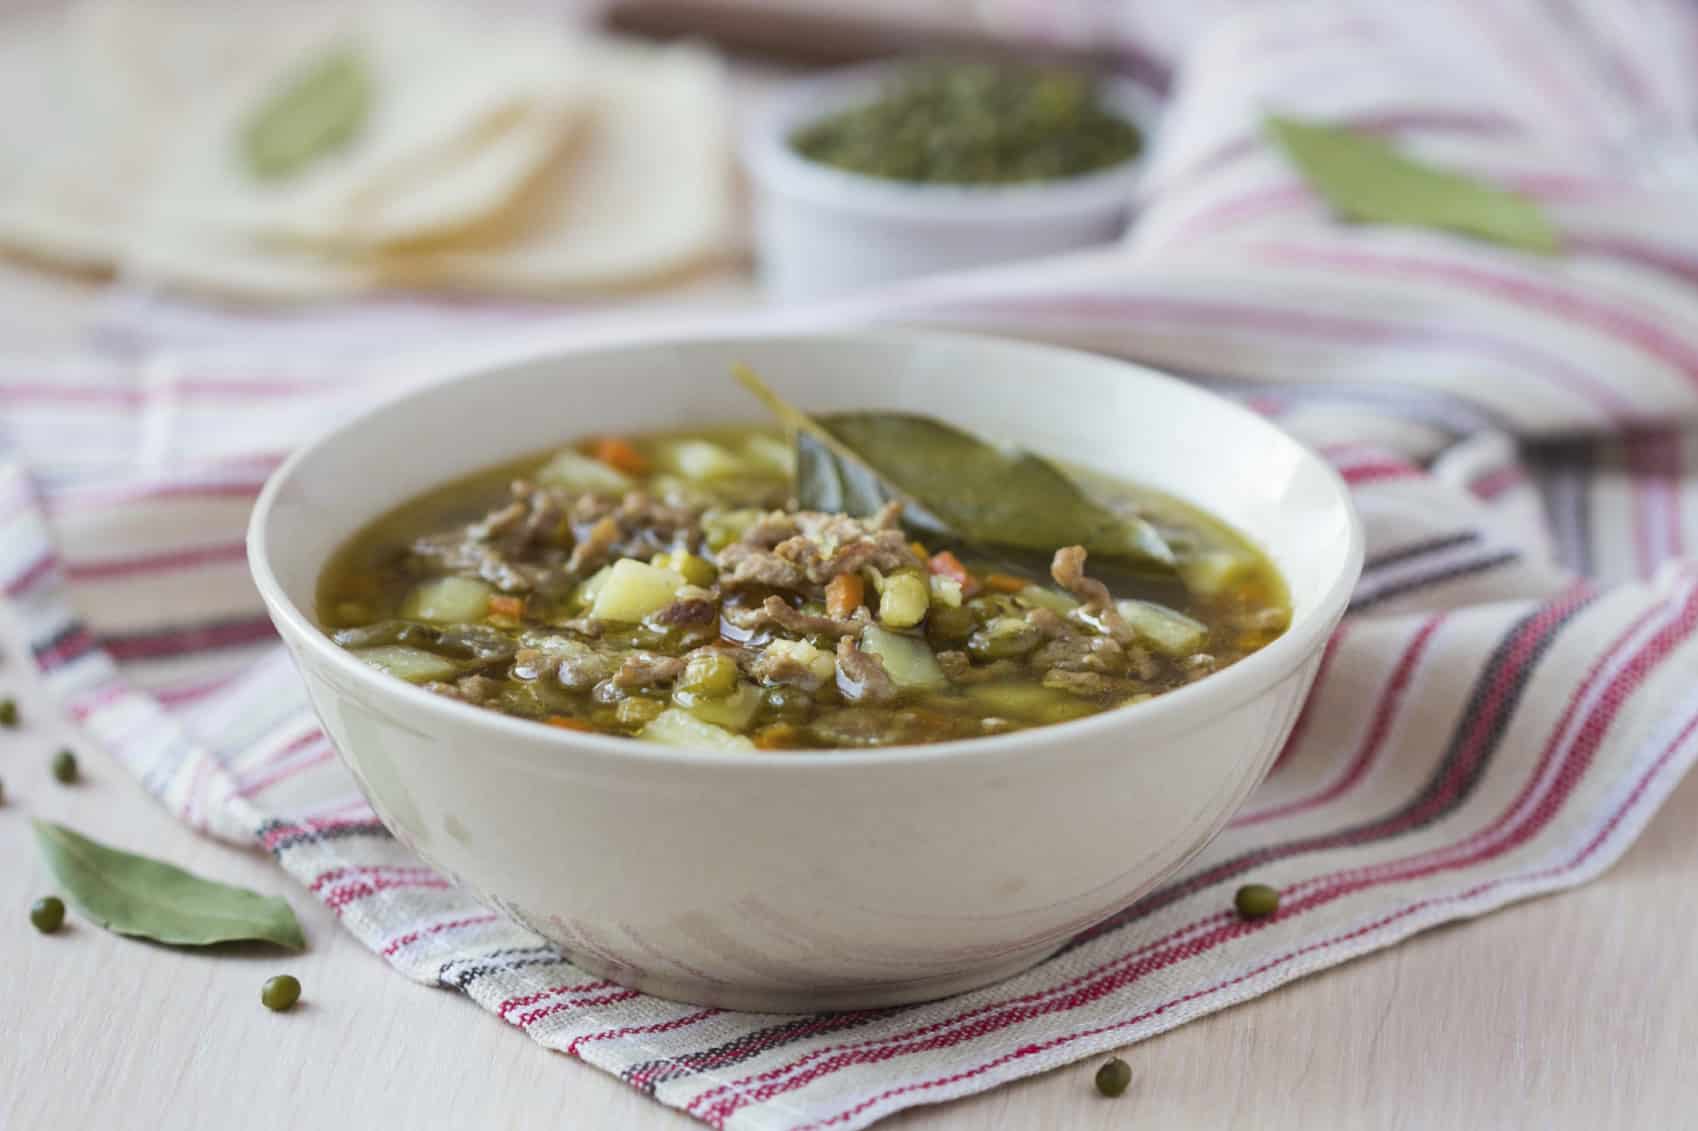 Warm up with a delicious hot bowl of this healthy chili verde with pork. This easy gluten-free recipe is perfect for a cozy night in or game day food.